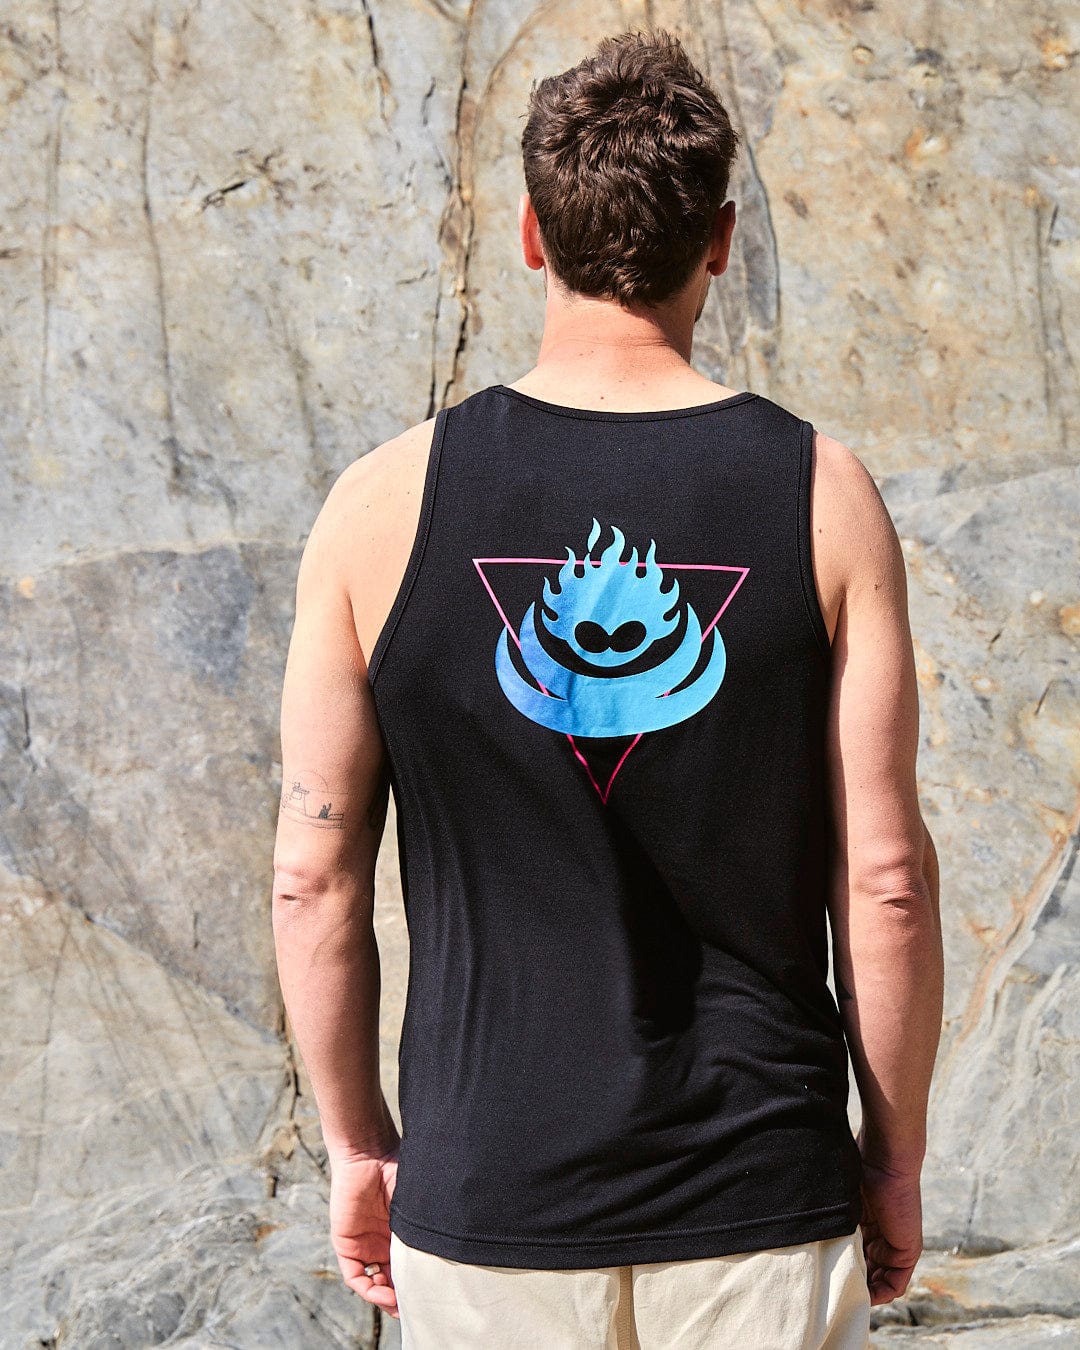 The back of a man wearing a Saltrock Flame Tri - Mens Recycled Vest - Black with a blue flame on it.